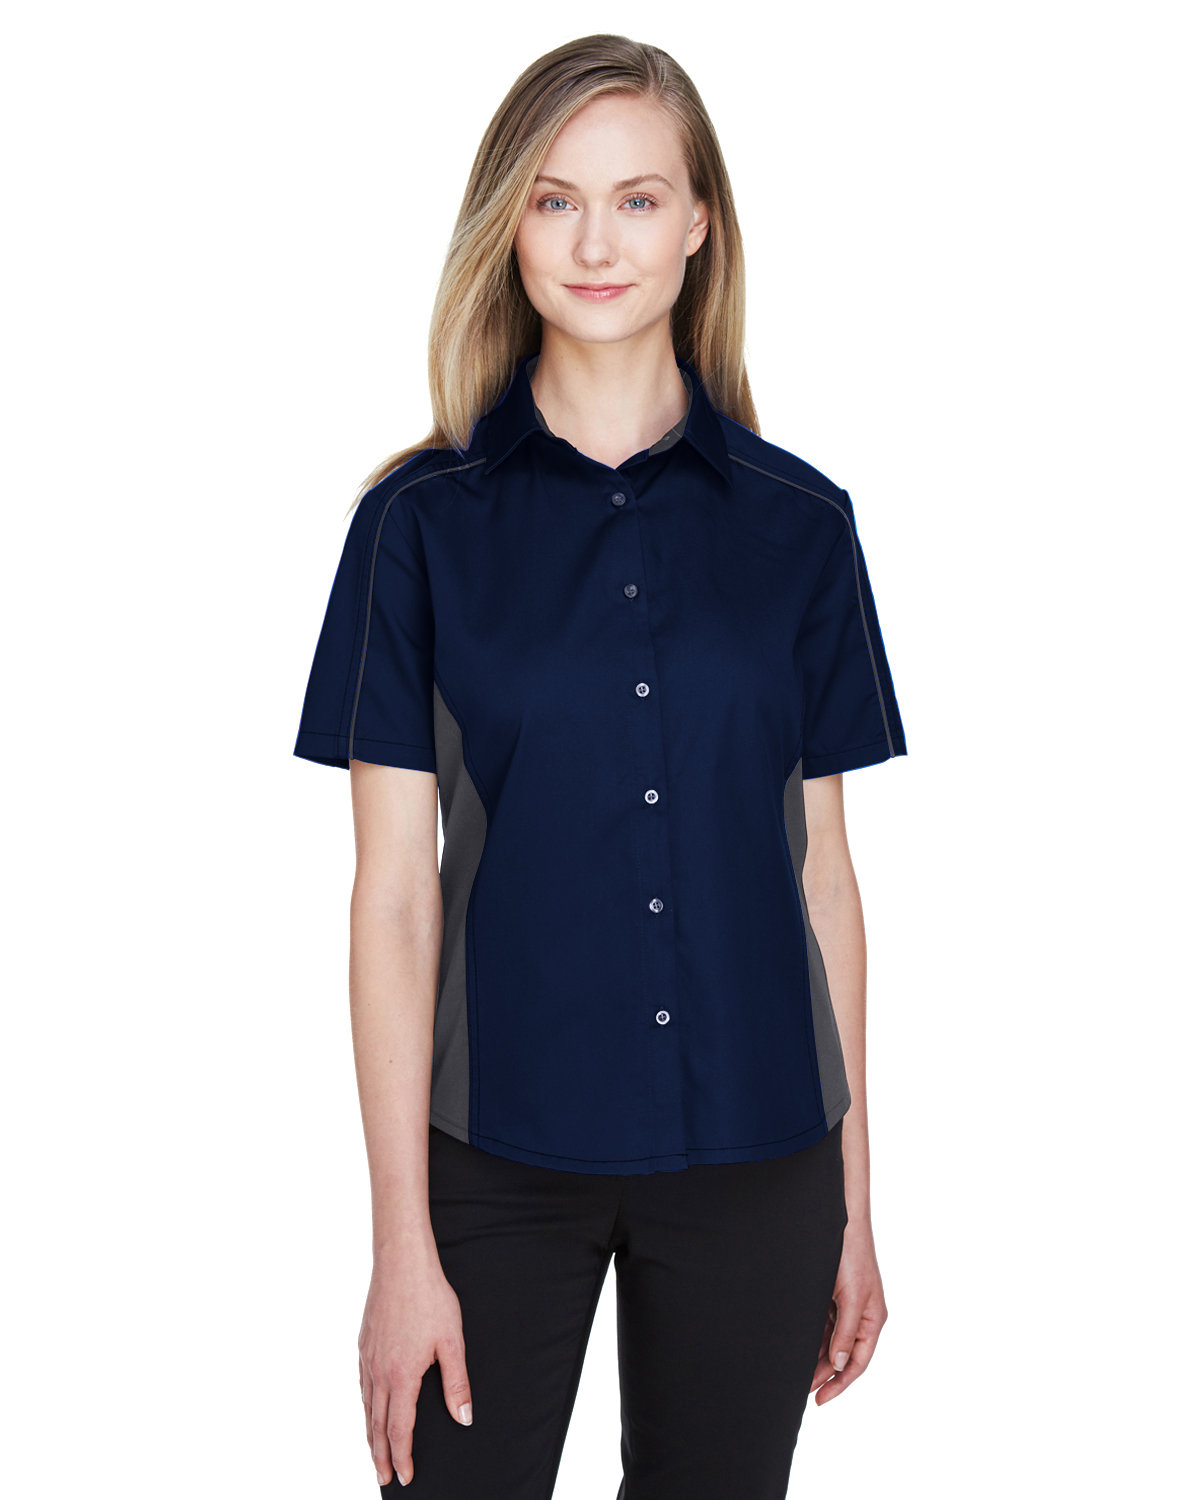 North End Ladies' Fuse Colorblock Twill Shirt CLASC NAVY/ CRBN 